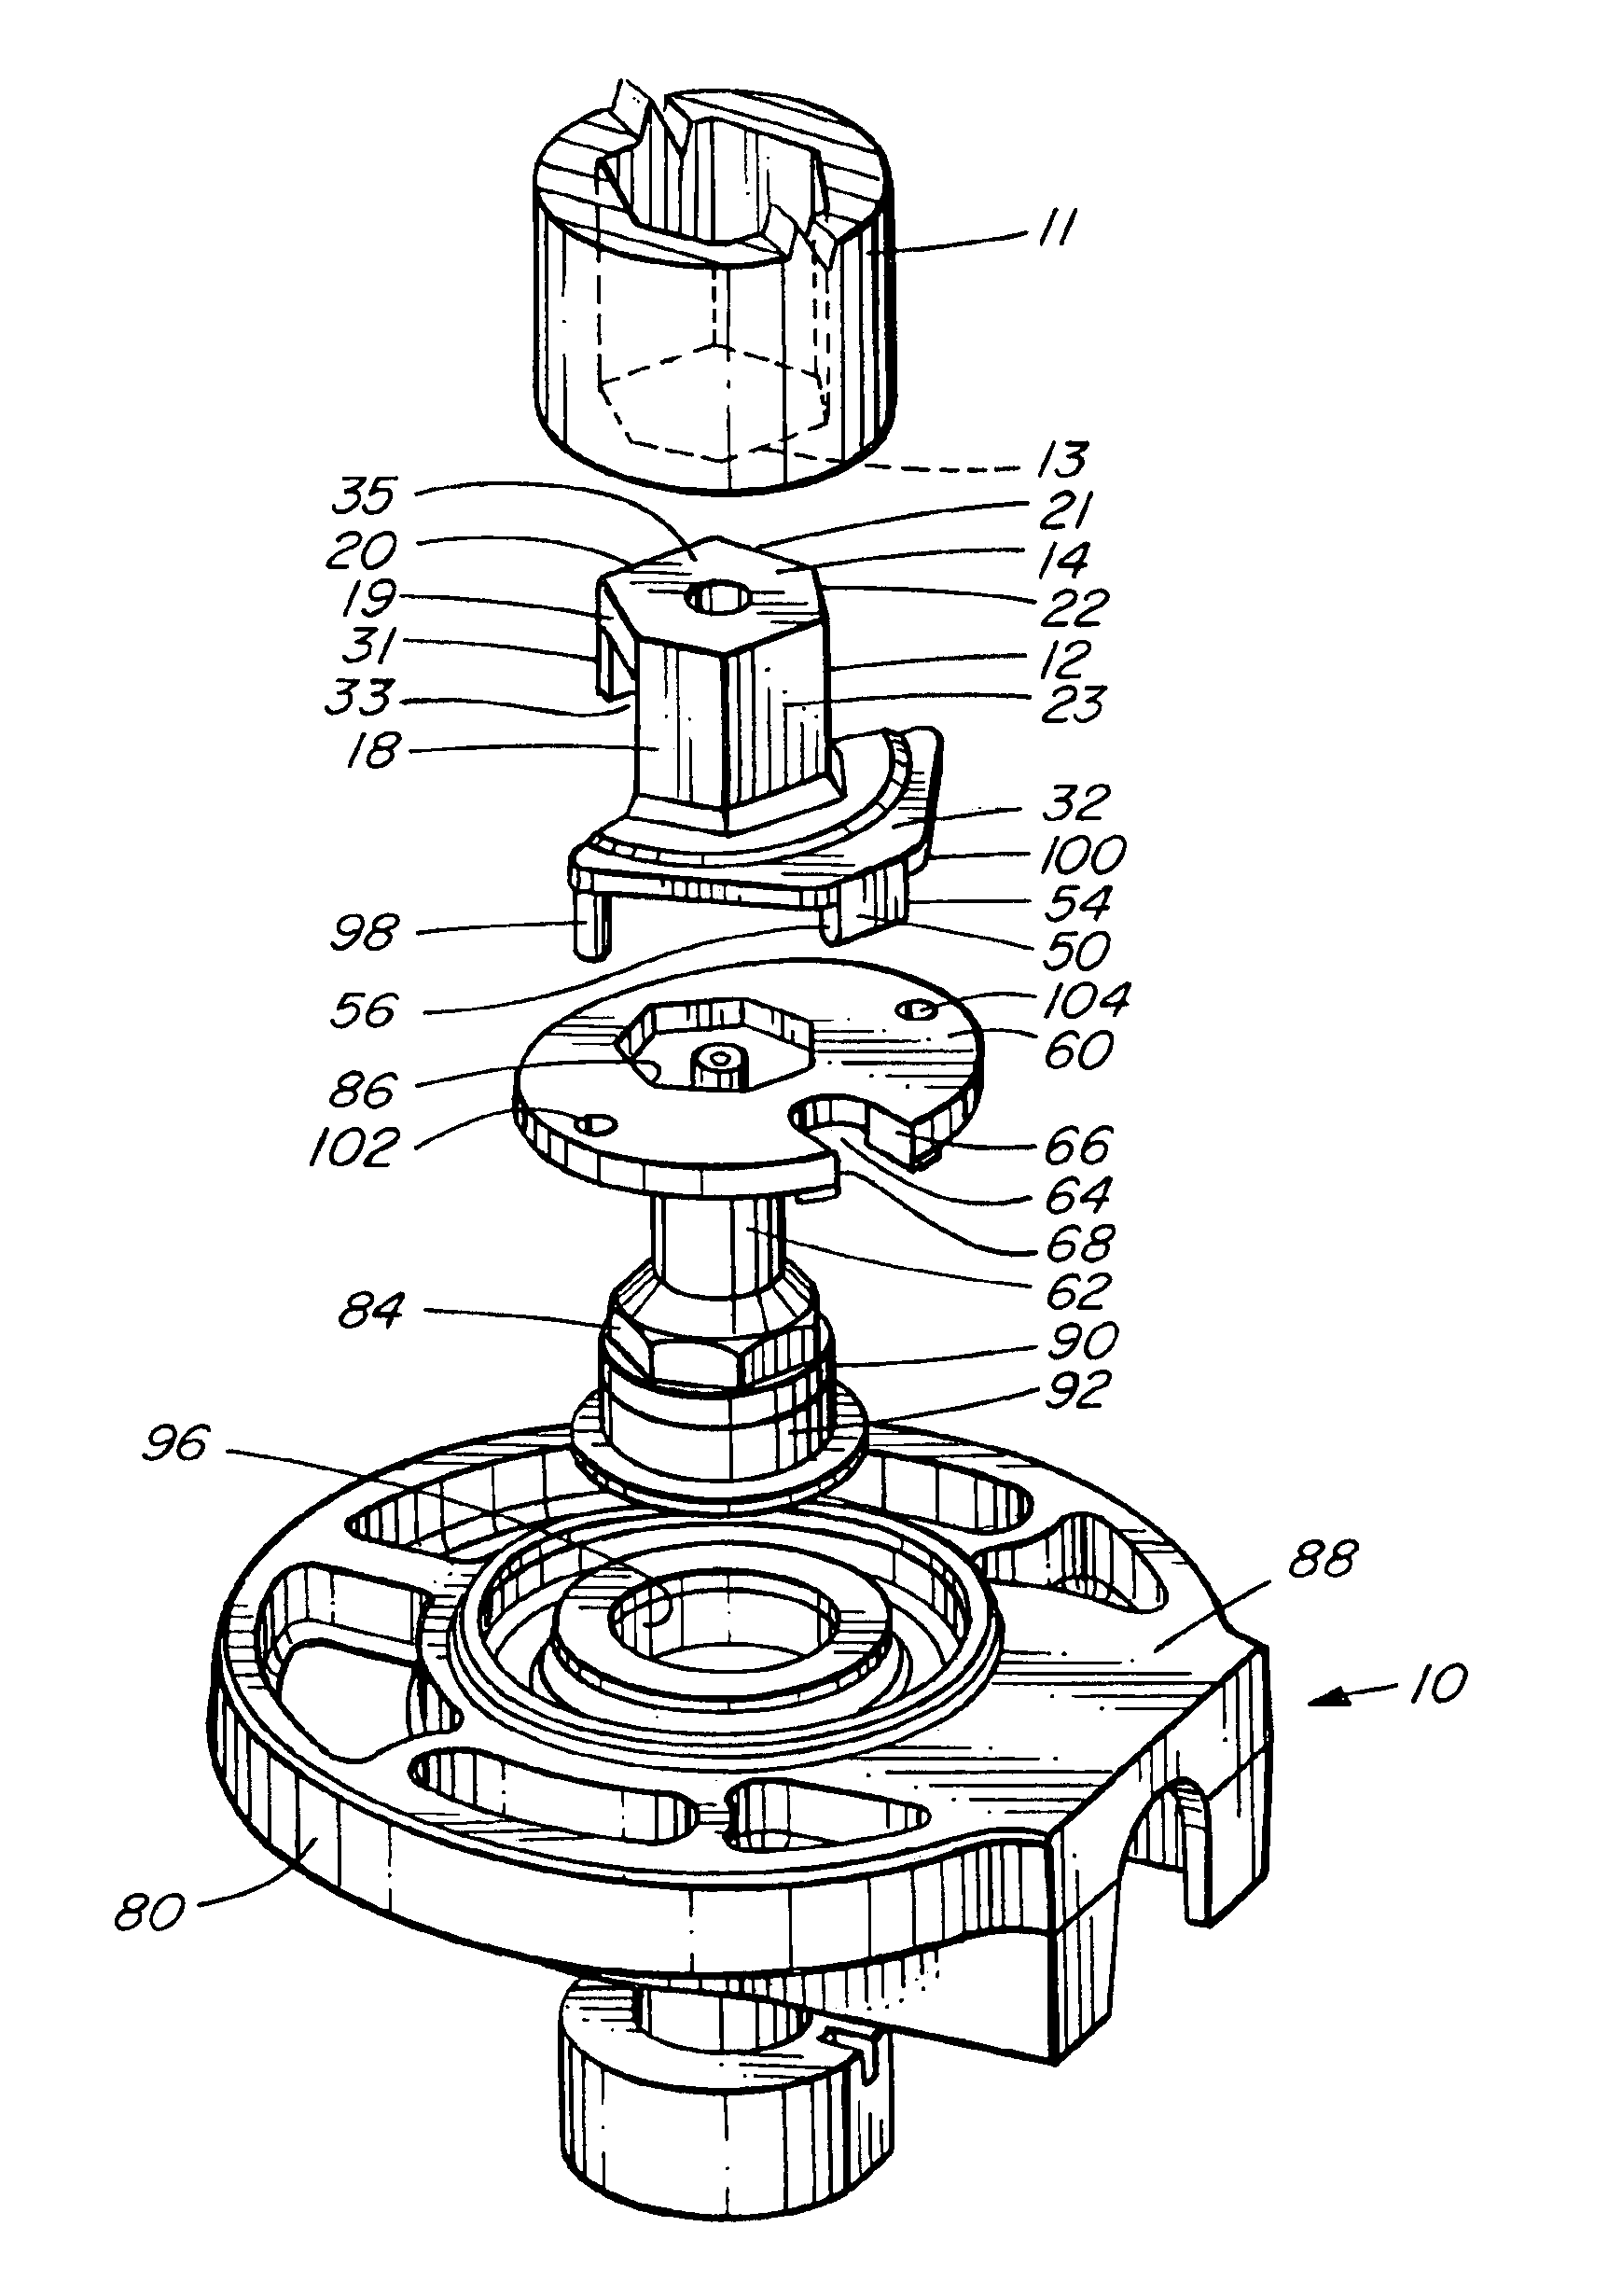 Device for rotating with a multisided socket